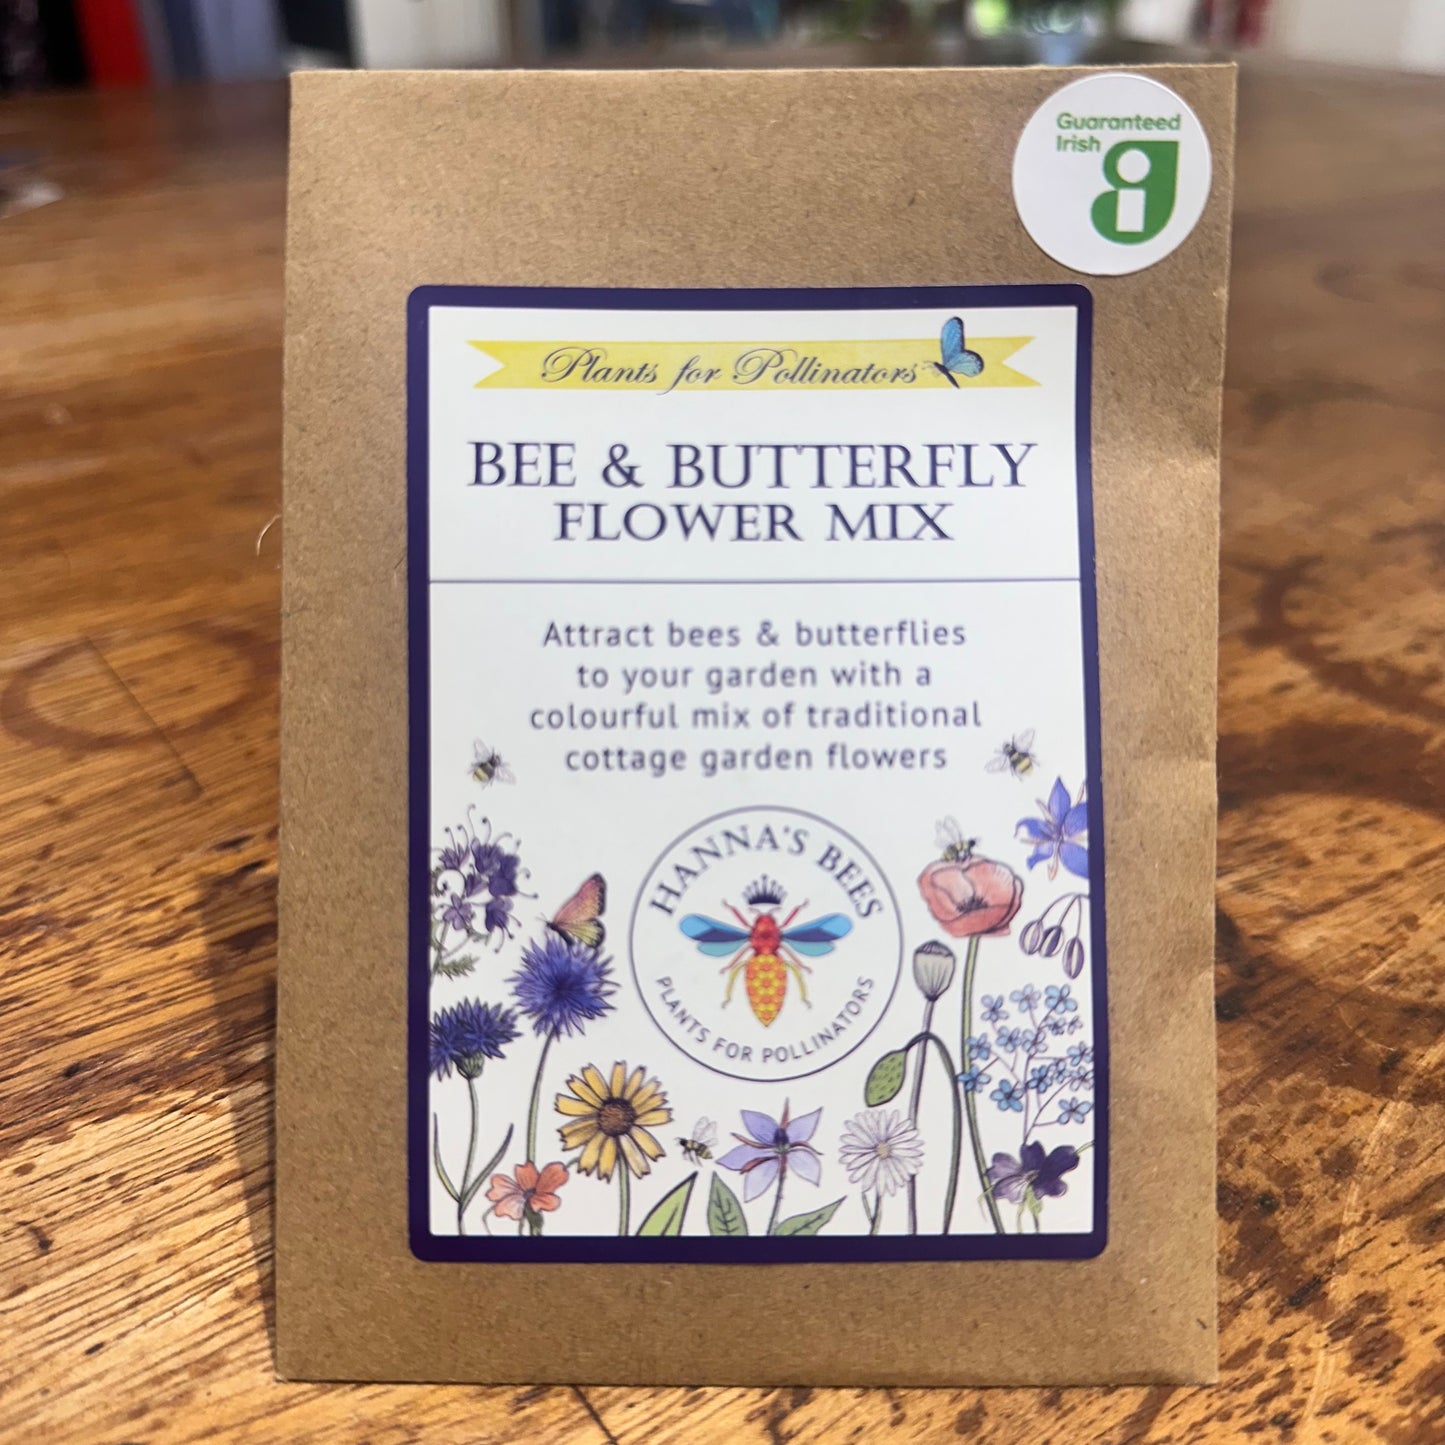 Hanna's Bees & Butterfly Flower Seeds - Plants for Pollinators